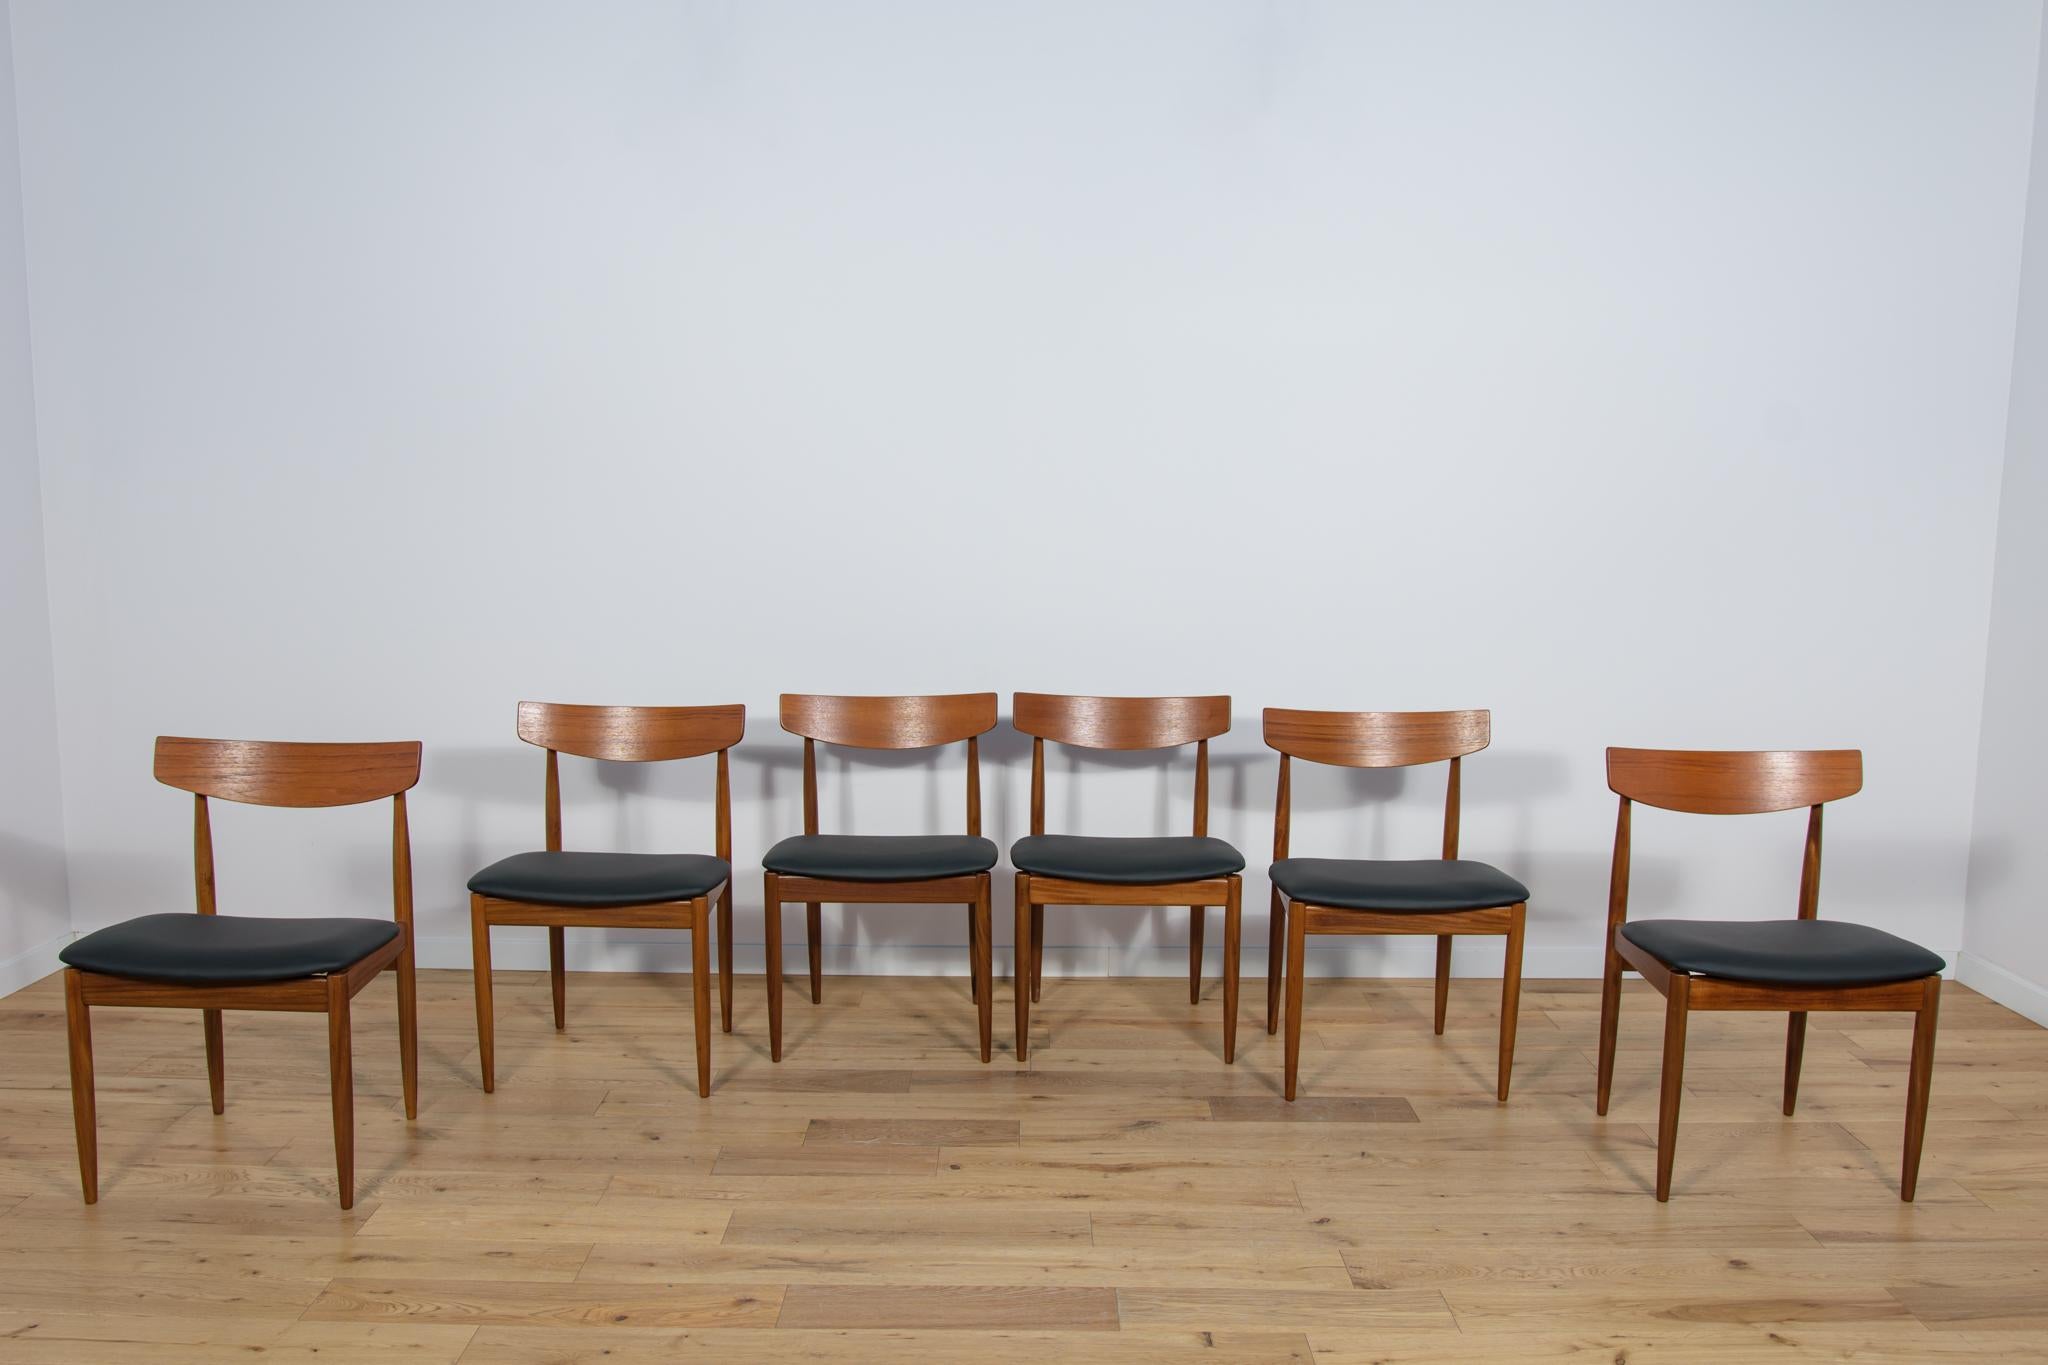 British Mid-Century Dining Chairs in Teak by Ib Kofod Larsen for G-Plan, 1960s. For Sale